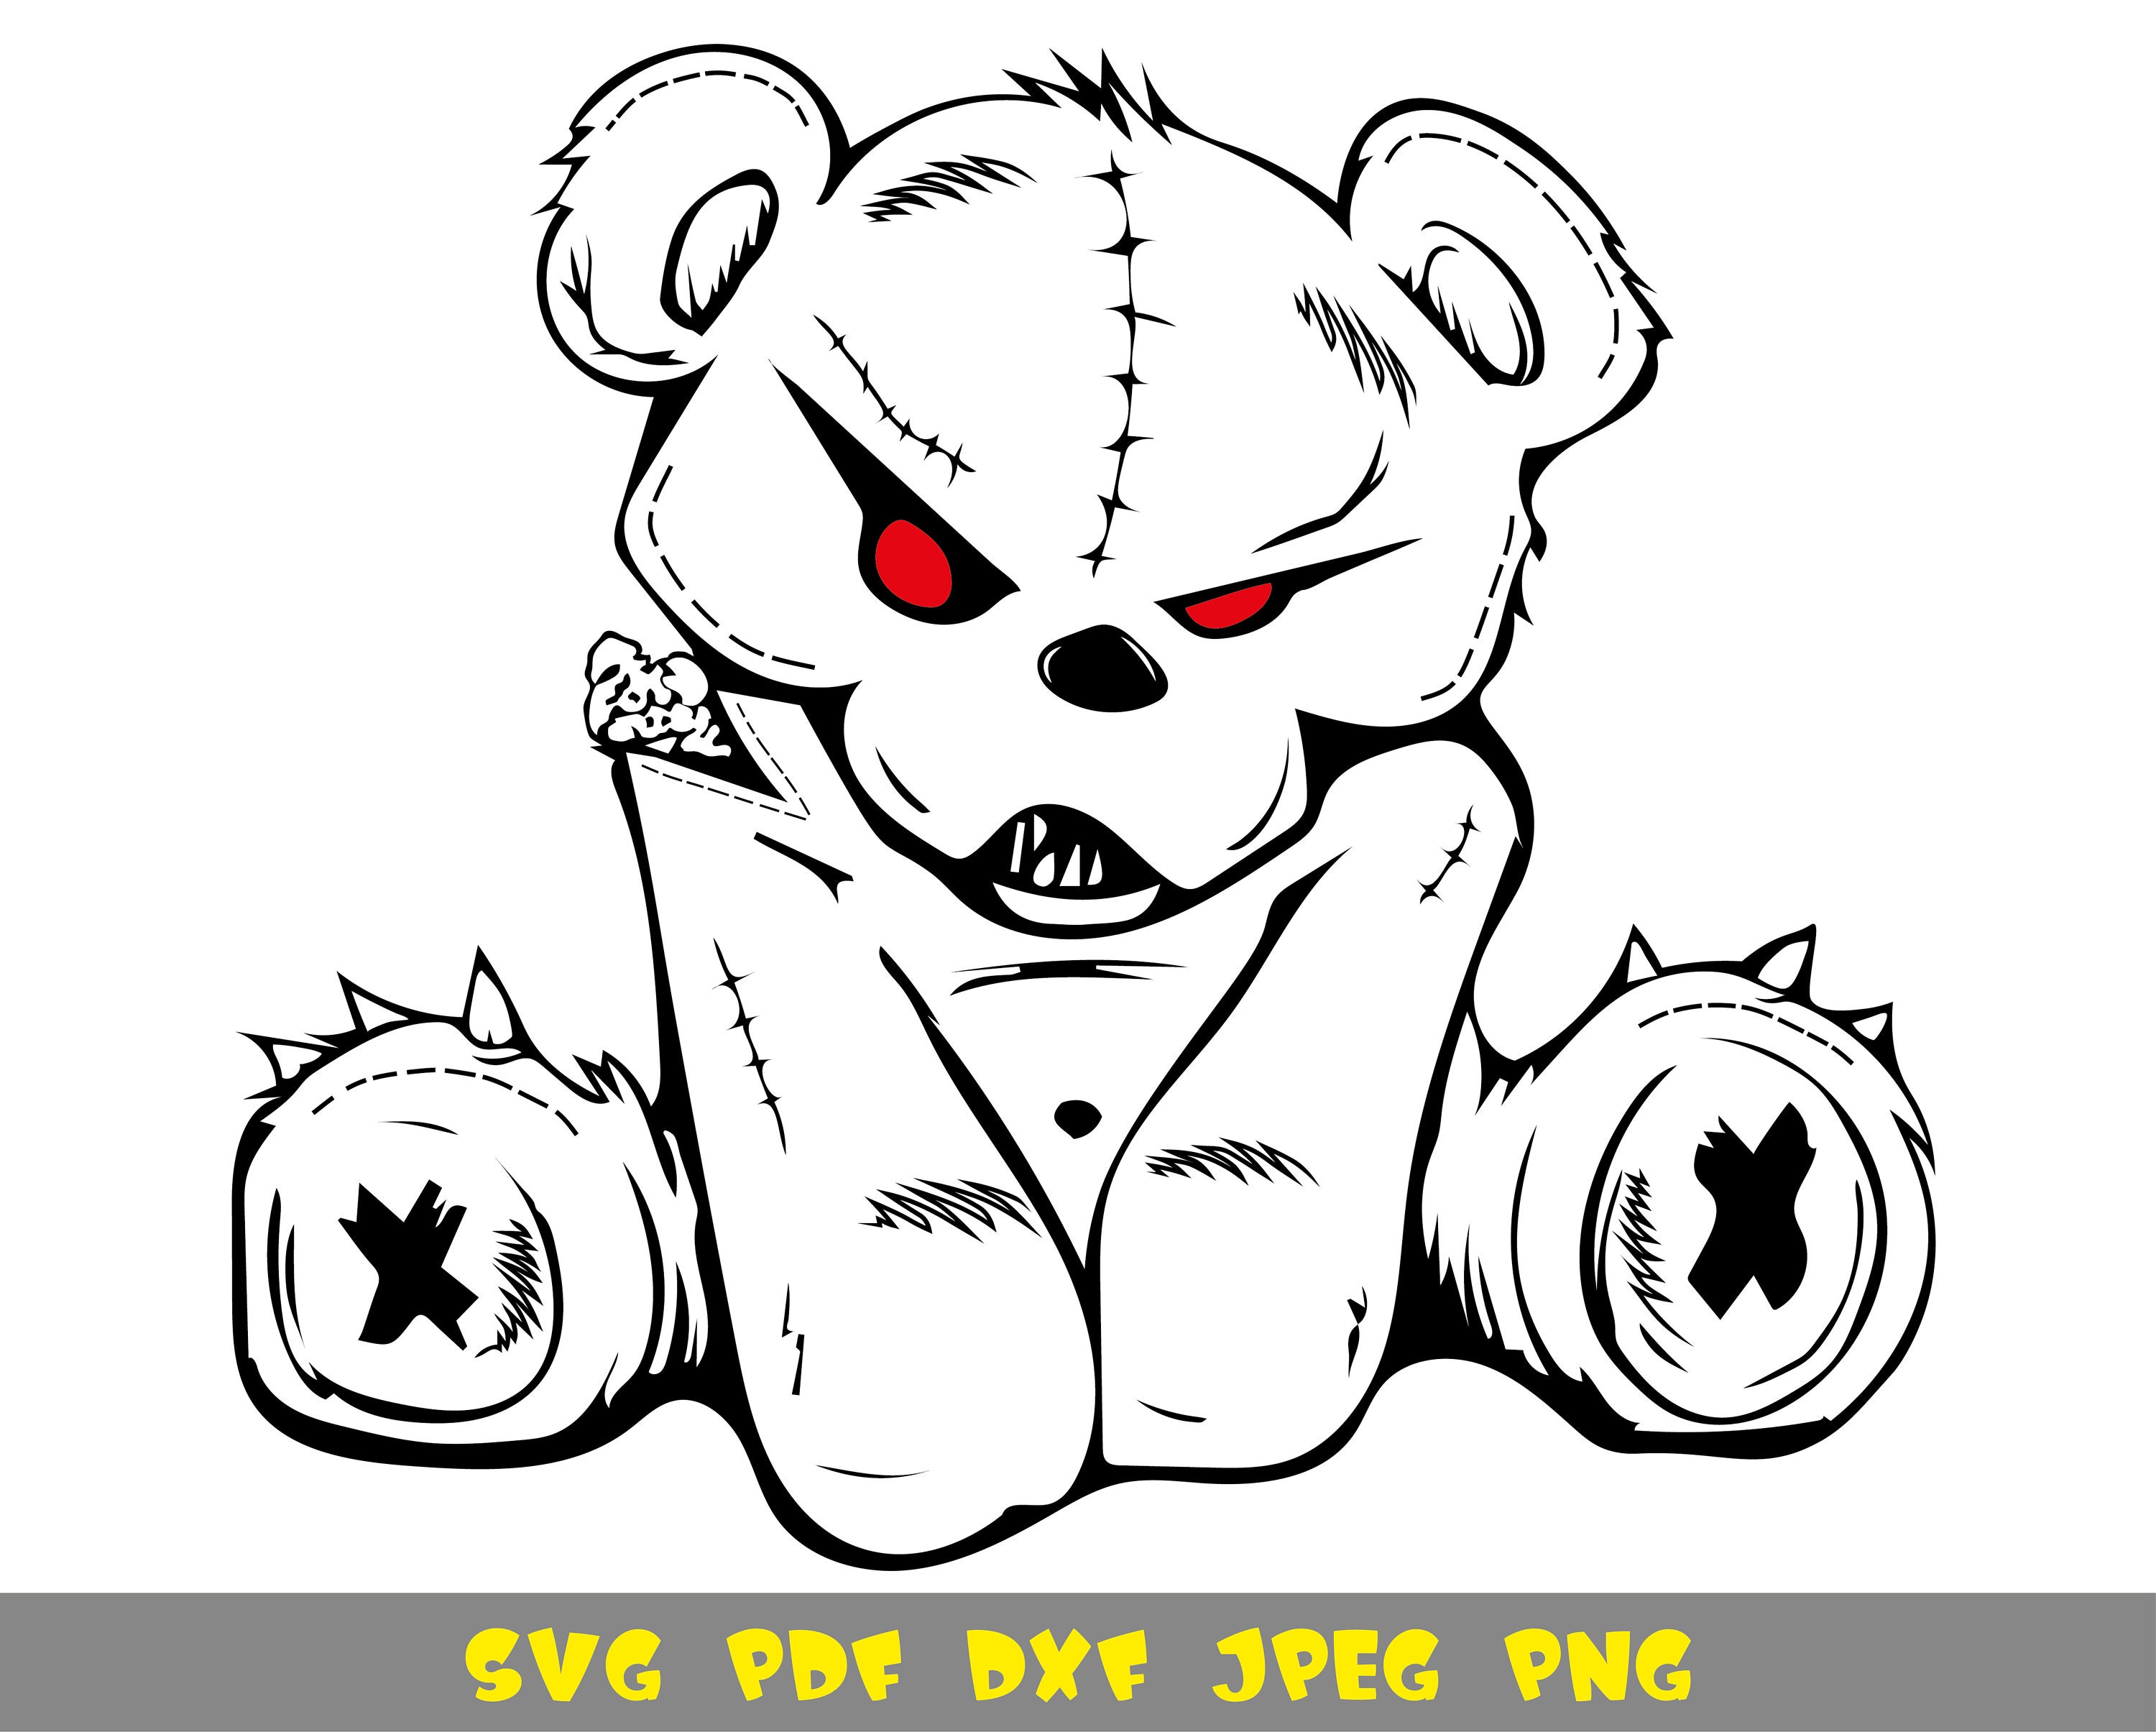 Angry bear svg png dxf jpg pdf files for t-shirt design | Etsy